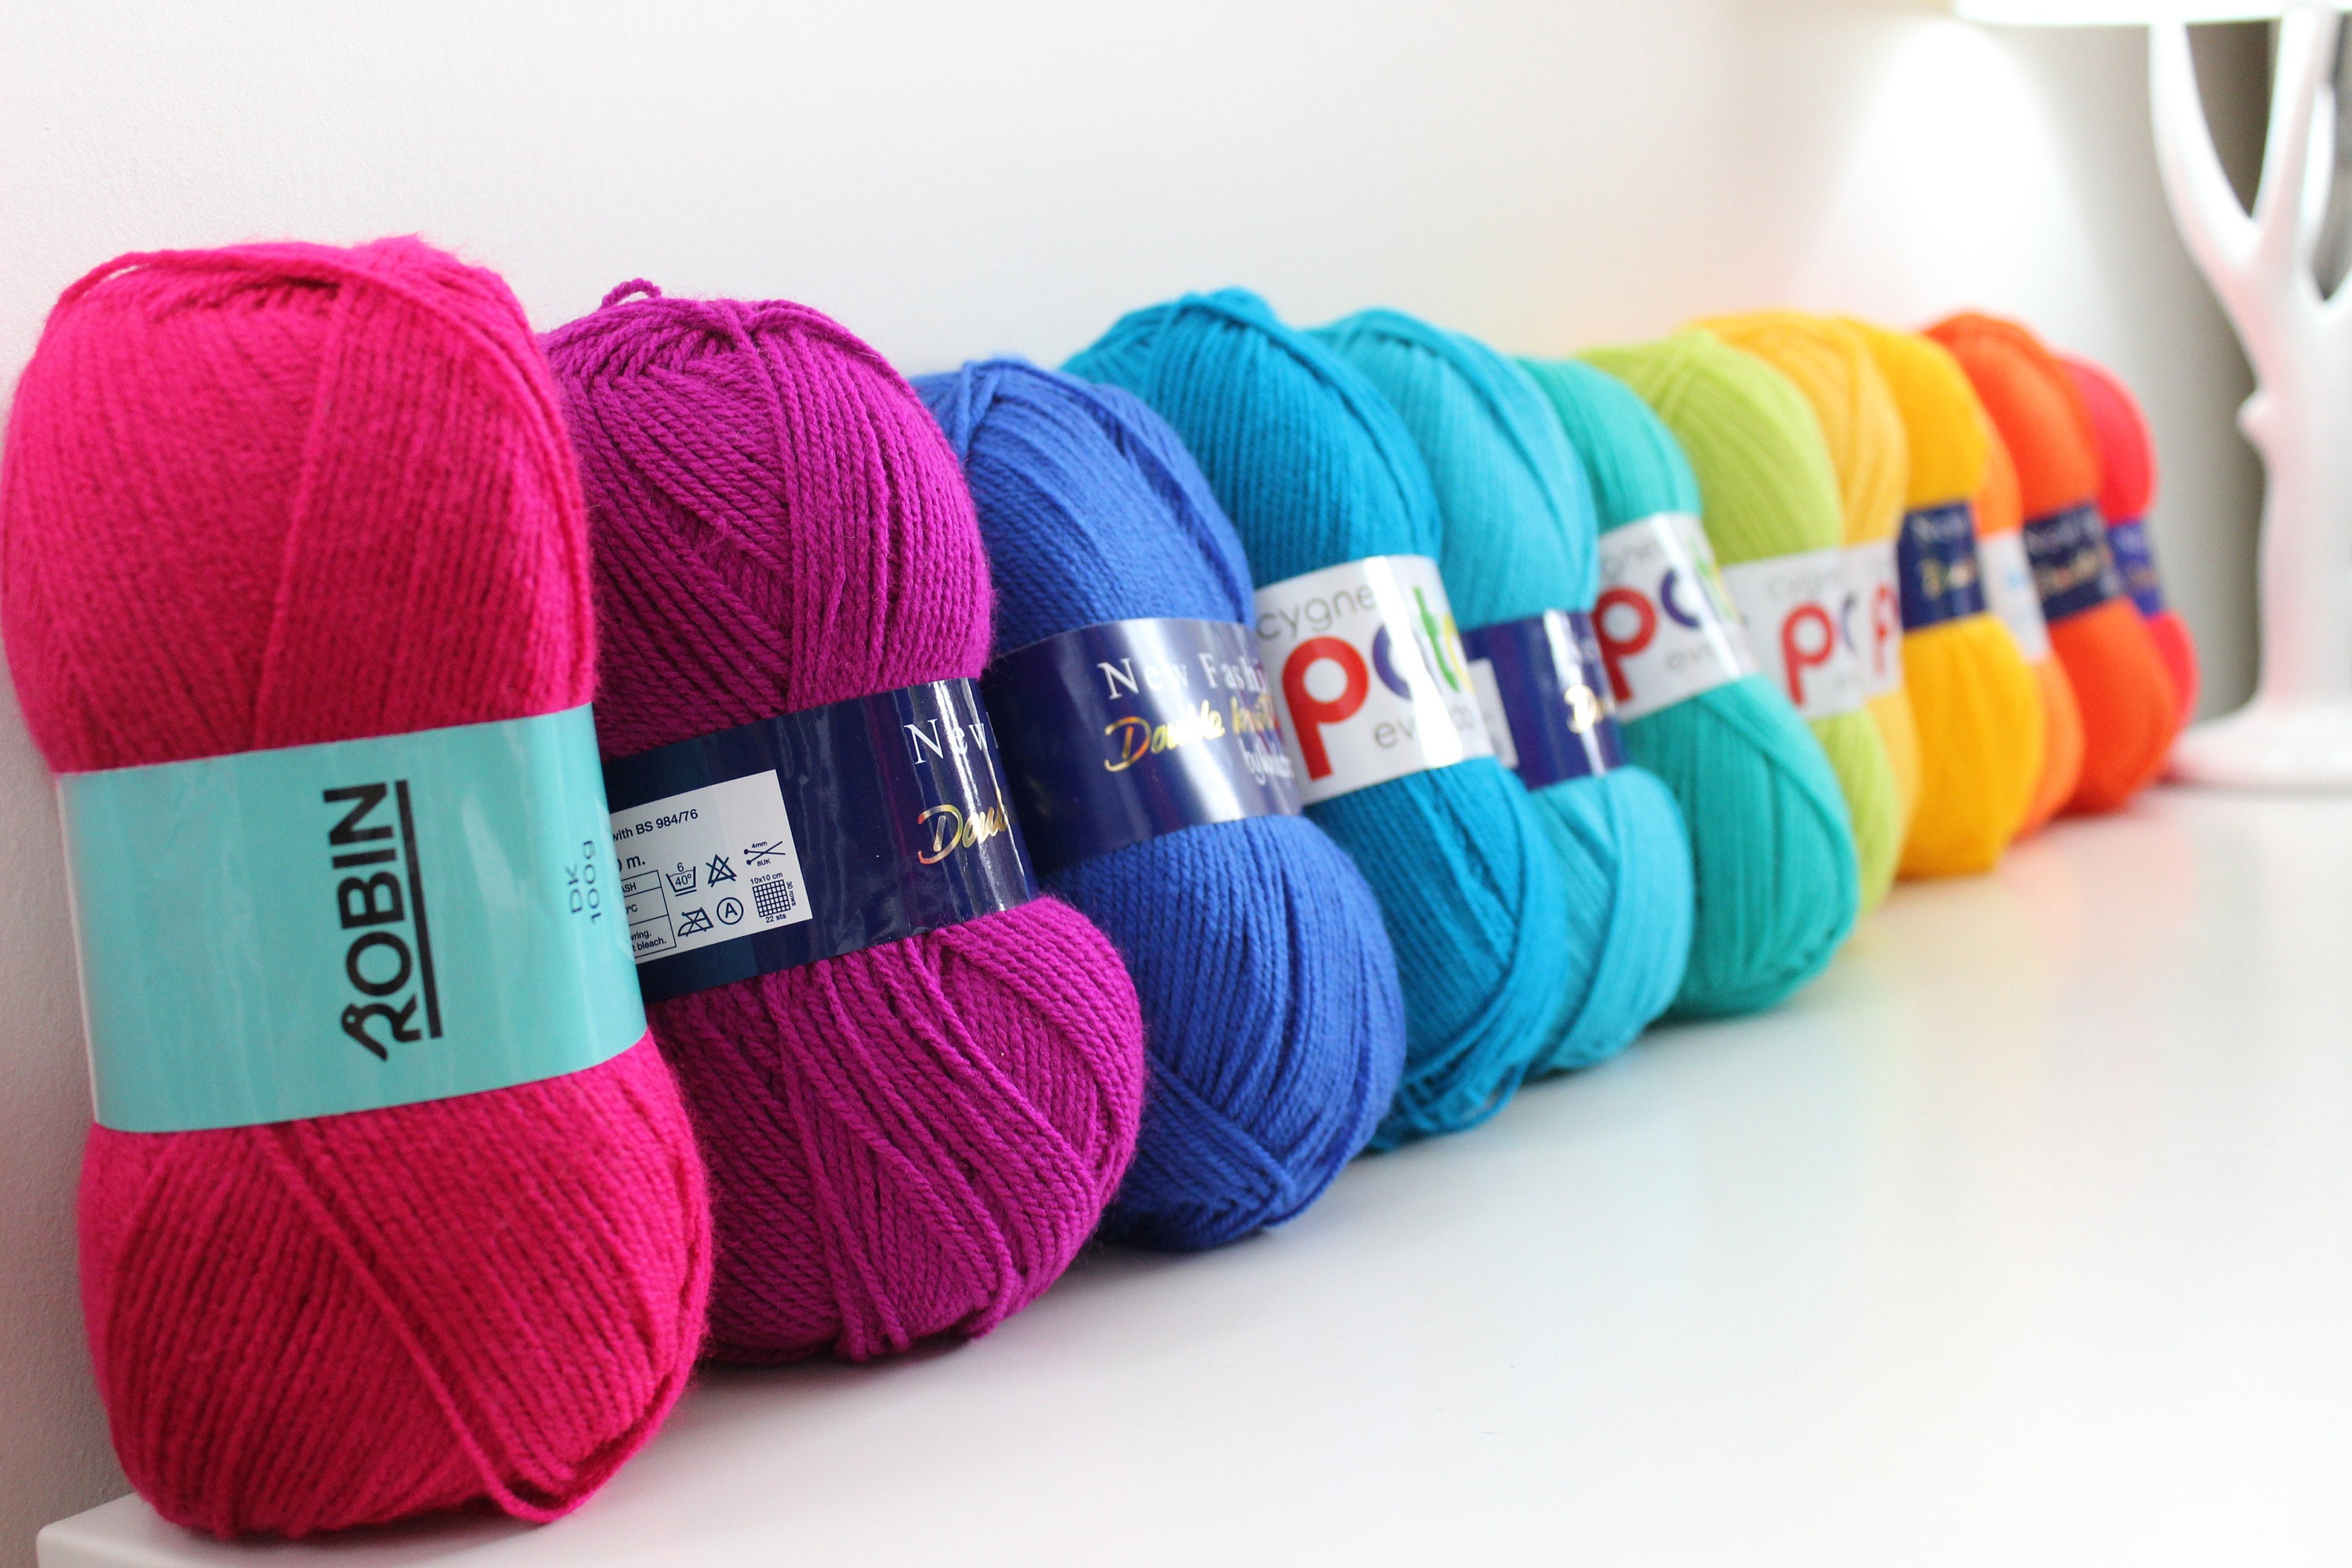 ACRILAN 3 HEBRAS [Multicolor Pack] - 15grs 12-Pack of 3-thread yarn for  crafts